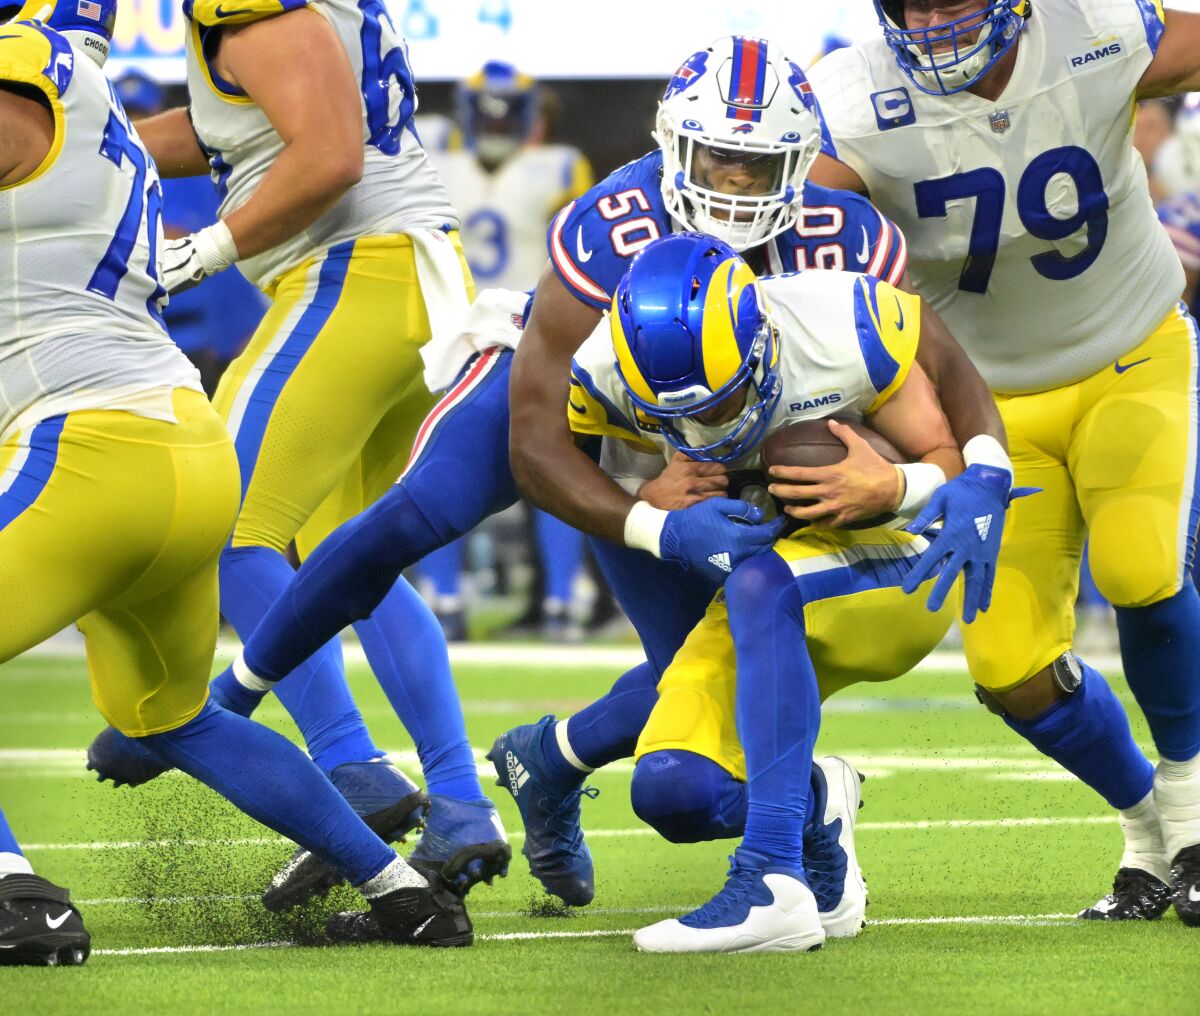 Rams quarterback Matthew Stafford is sacked by Bills defensive end Gregory Rousseau in the third quarter.